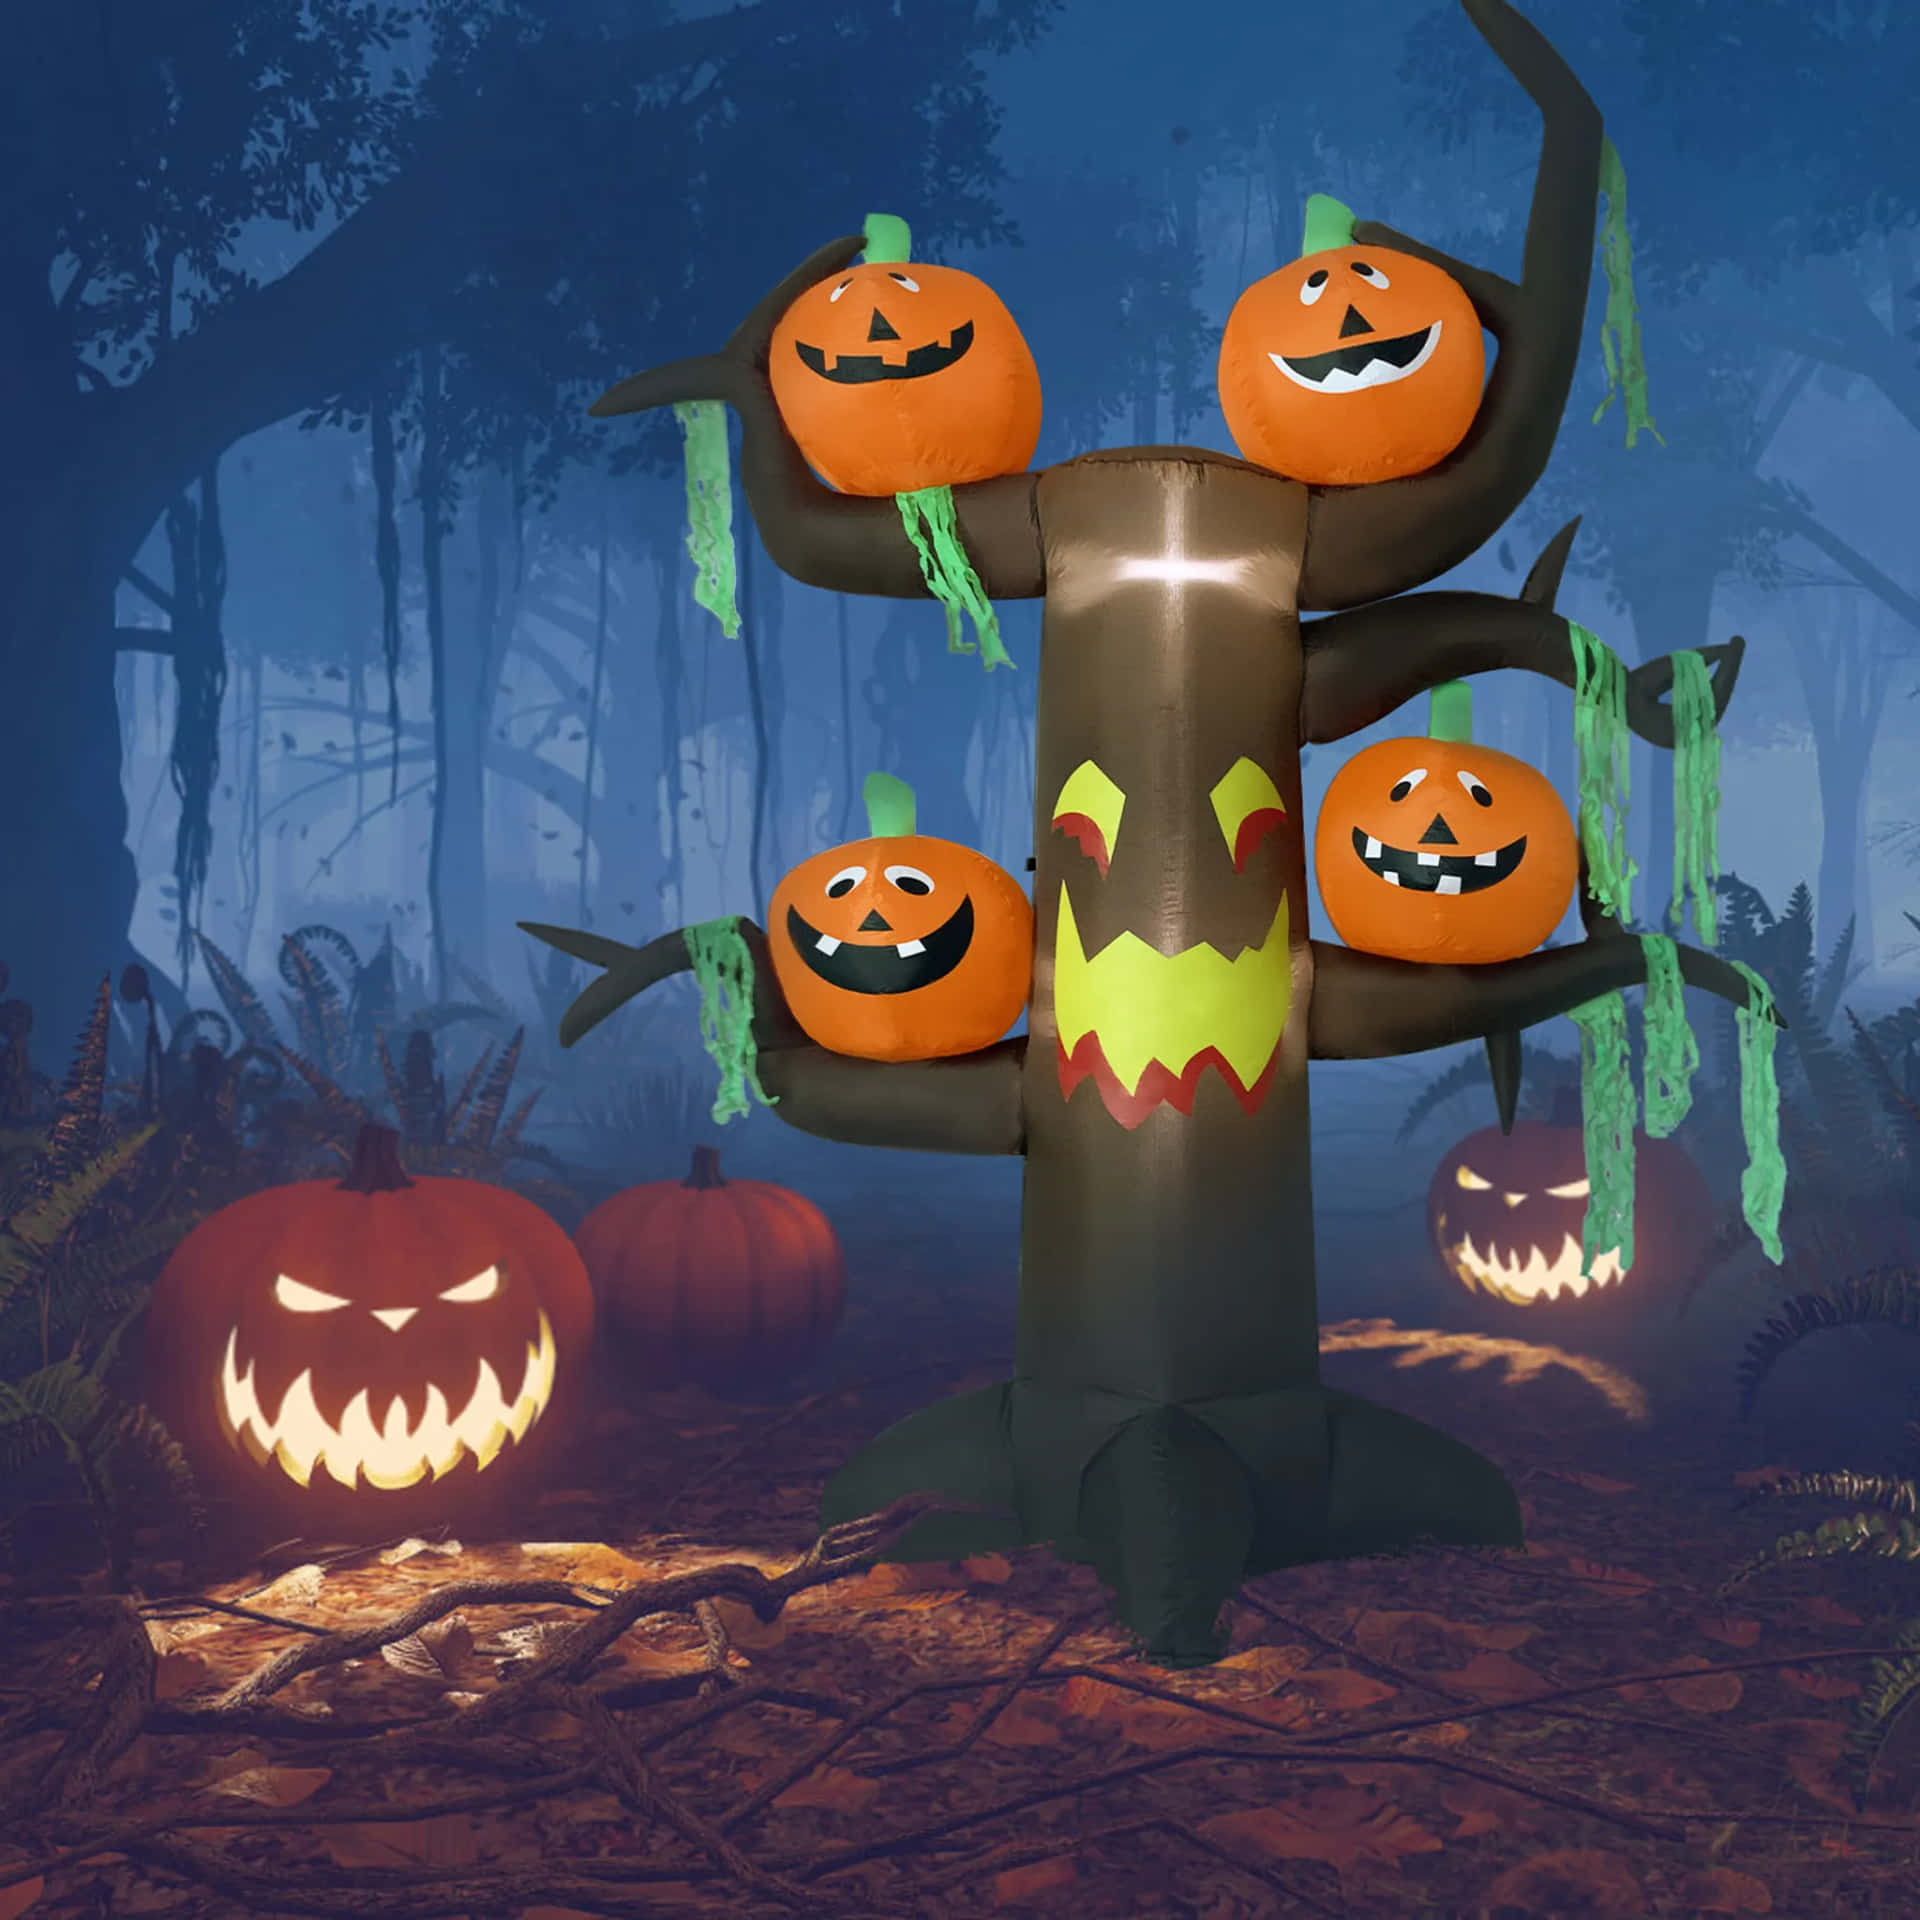 Check out this spooky Halloween night! Wallpaper